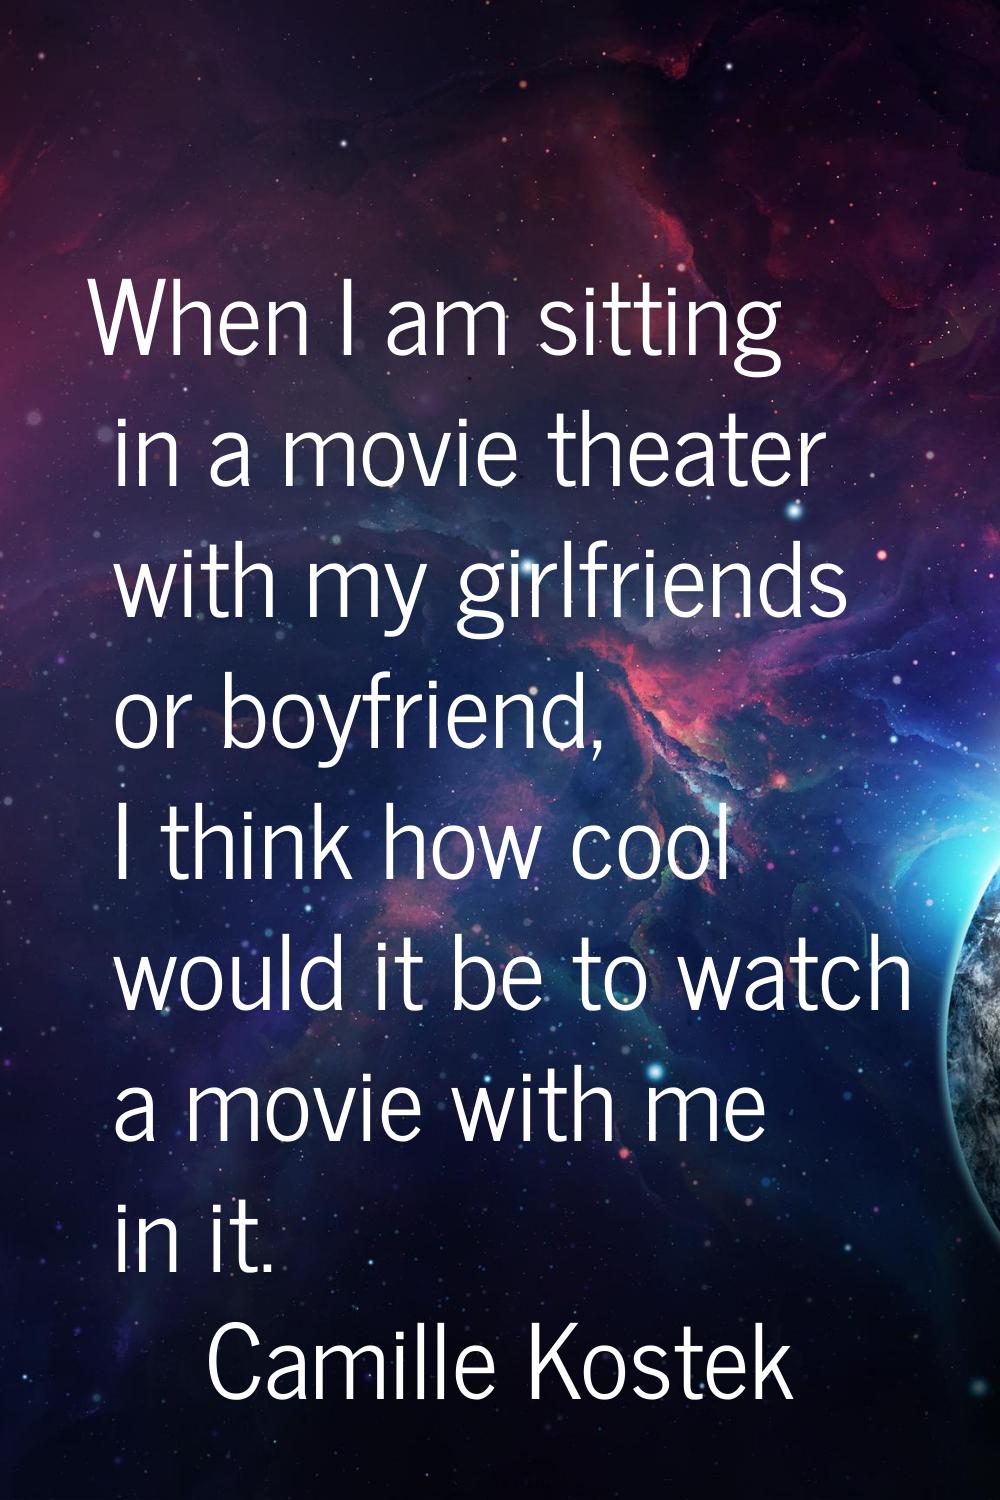 When I am sitting in a movie theater with my girlfriends or boyfriend, I think how cool would it be